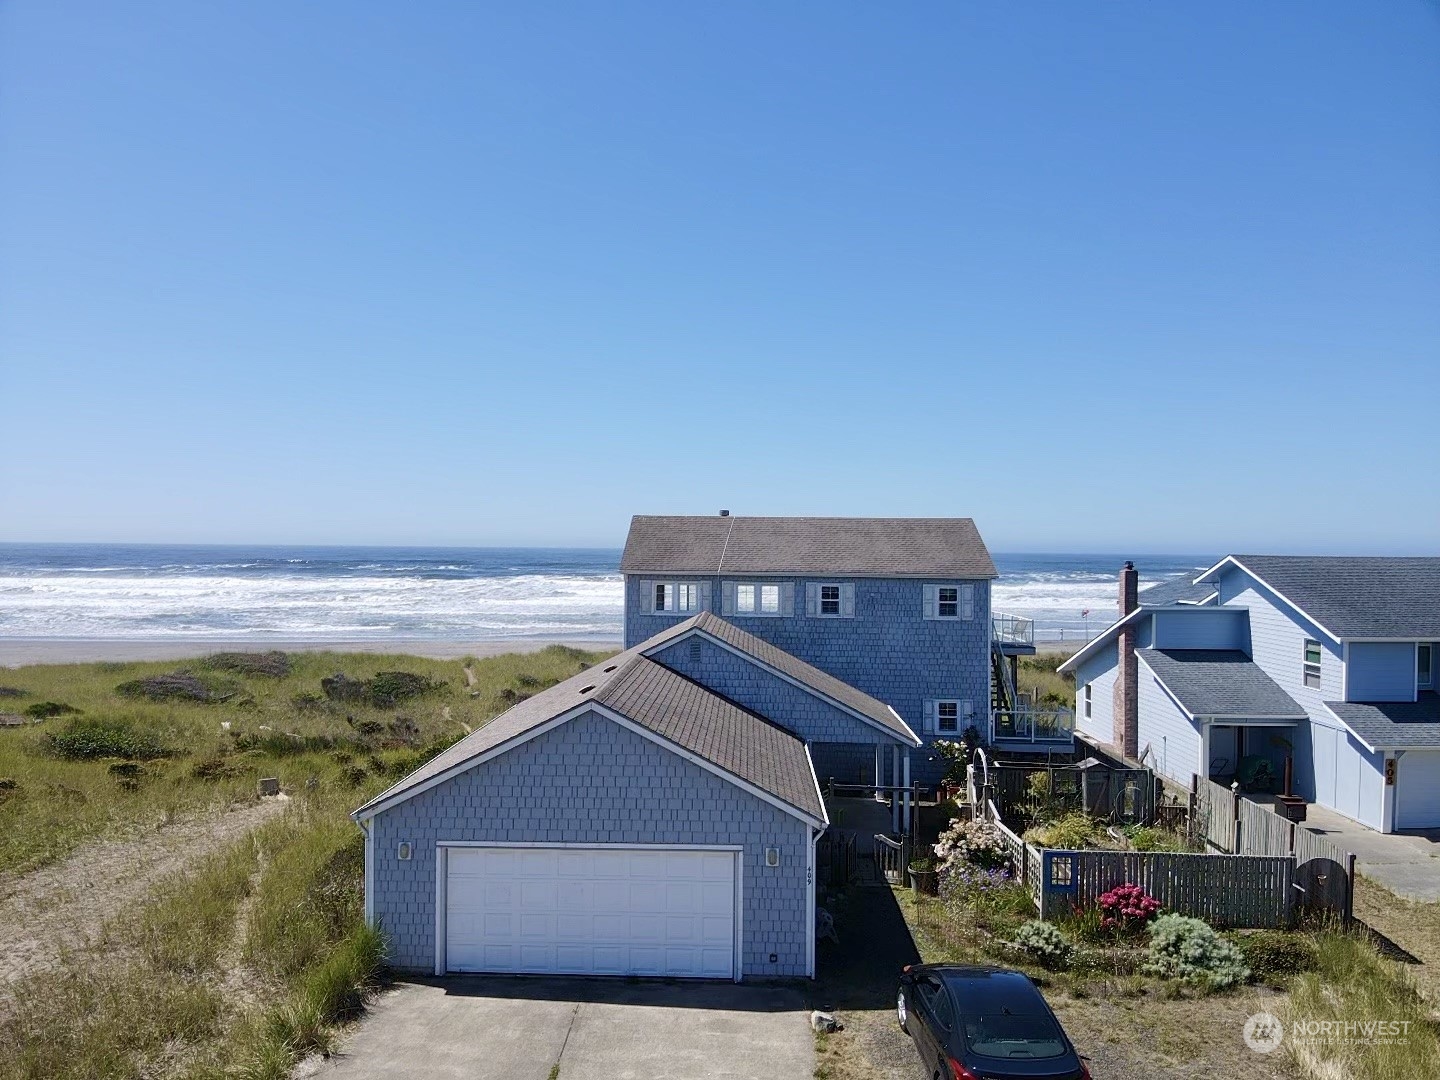 a view of a house with a ocean view